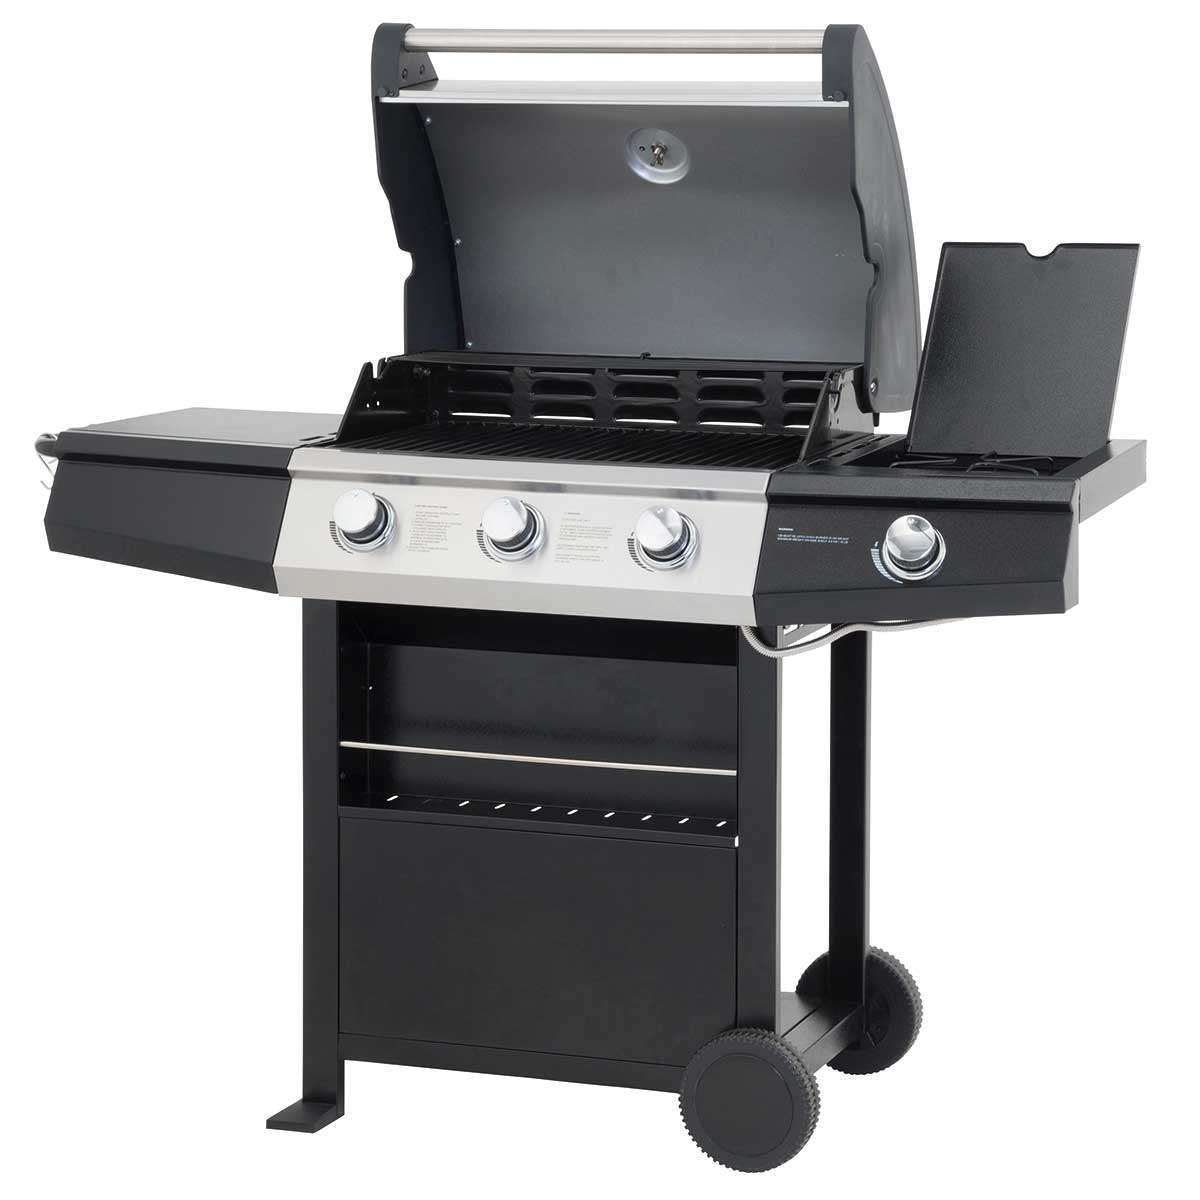 Exceptional Garden:Lifestyle St. Vincent 3+1 Gas Barbeque Grill